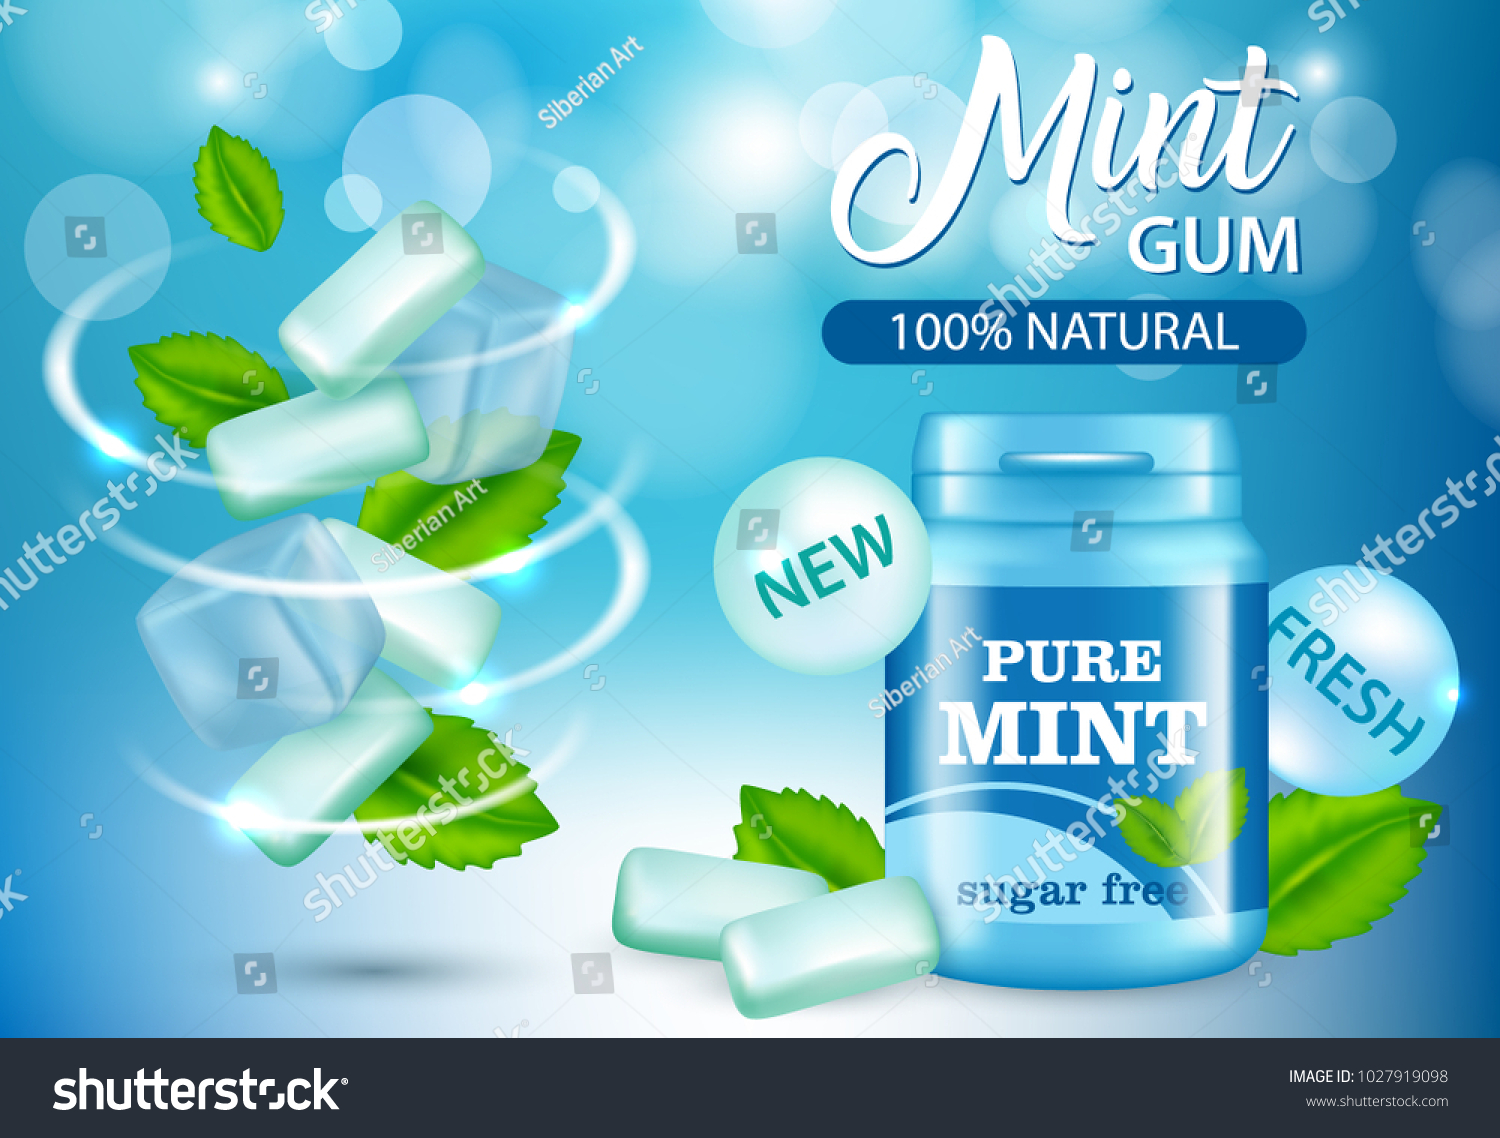 Download Vector Realistic Swirl Fresh Mint Chewing Stock Vector Royalty Free 1027919098